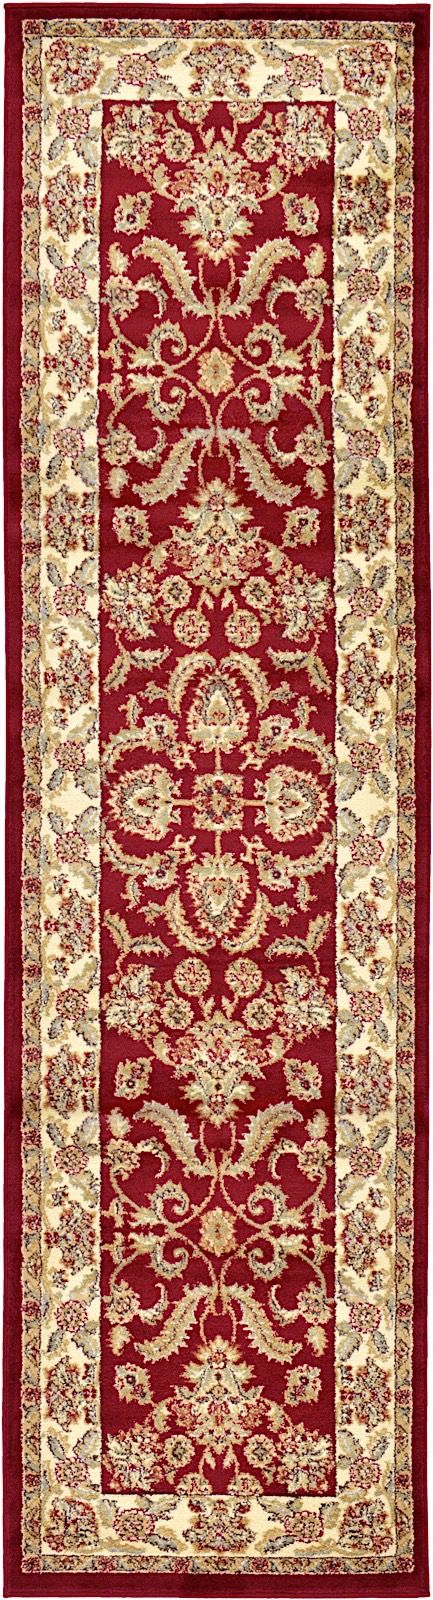 odyssey traditional area rug collection